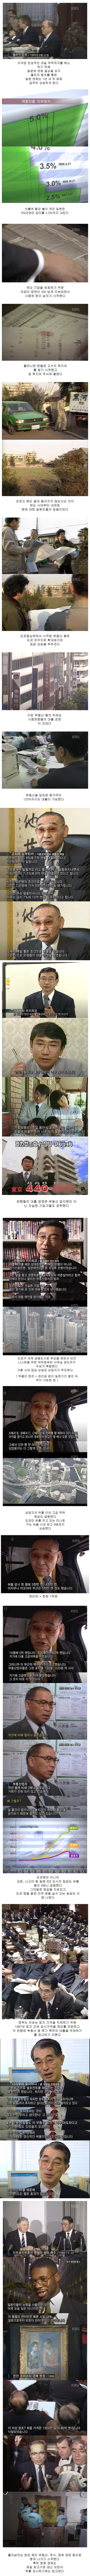 The end of Japan's real estate debacle.